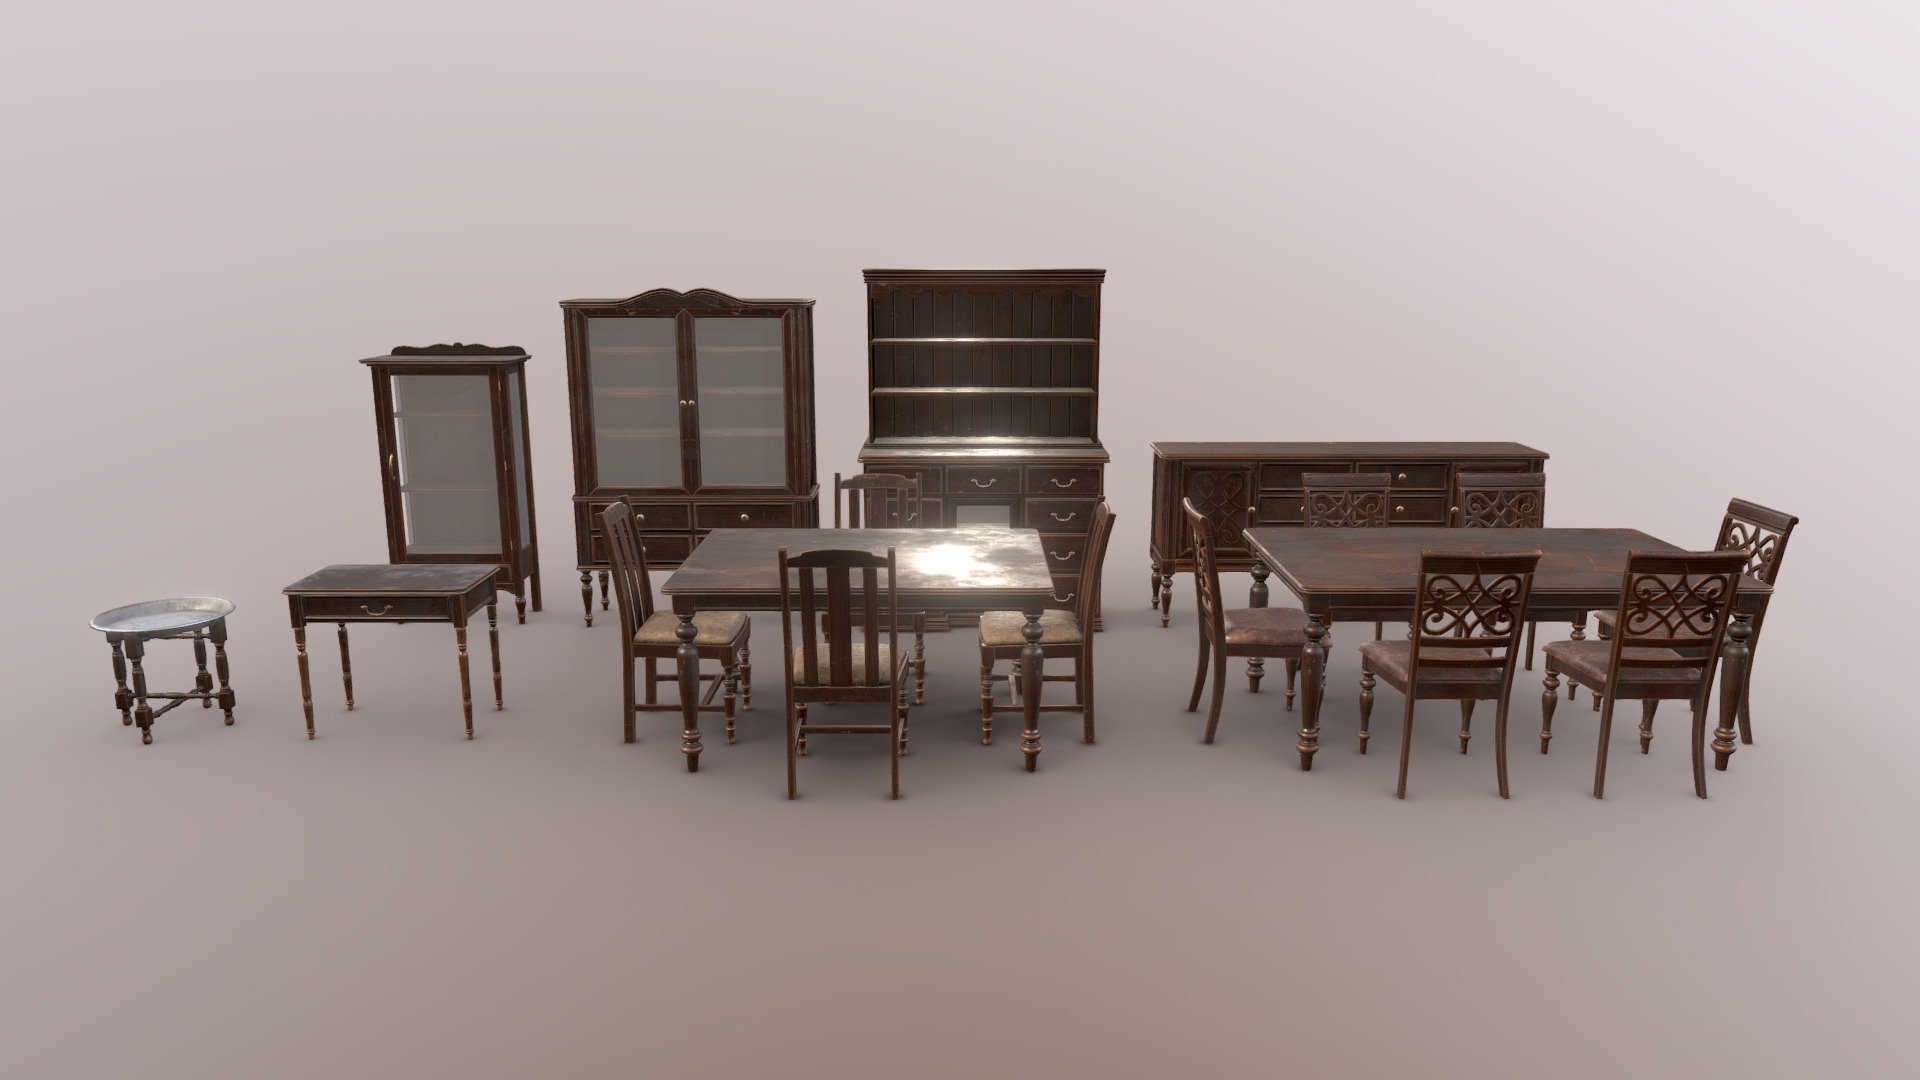 Personal work (3dsMax, Substance Painter, Photoshop)

These models are part of current Blockchain Game in development: Goldfever

Gold Fever - Have fun and earn with our gold rush simulation &hellip;
https://goldfever.io - Antique Dinning Room Furniture - 3D model by Xorxe 3d model